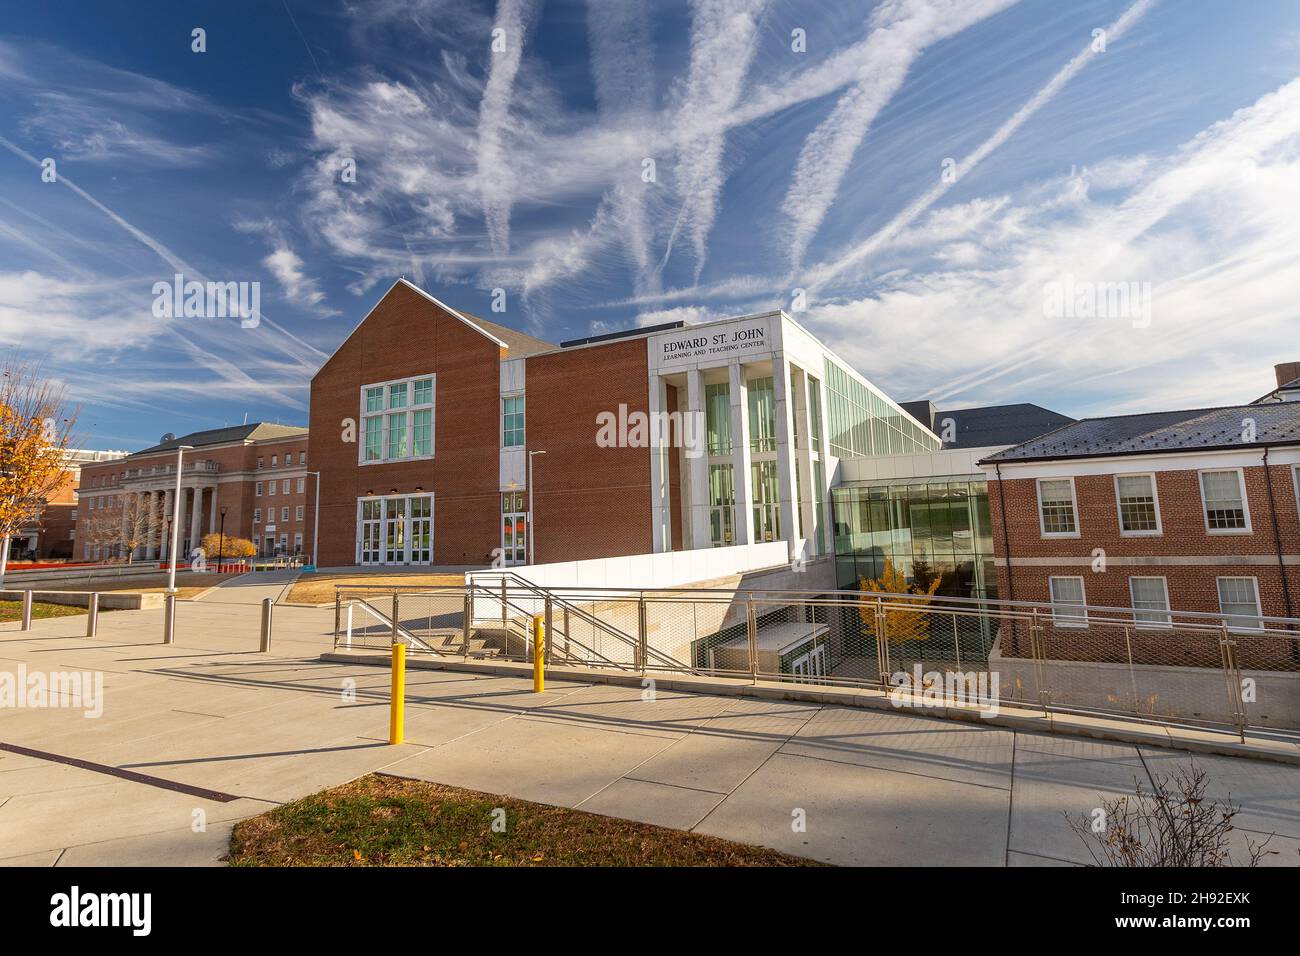 COLLEGE PARK, MD, USA - 20. NOVEMBER: Edward St. John Learning and Teaching Center am 20. November 2021 an der University of Maryland in College Park, Stockfoto